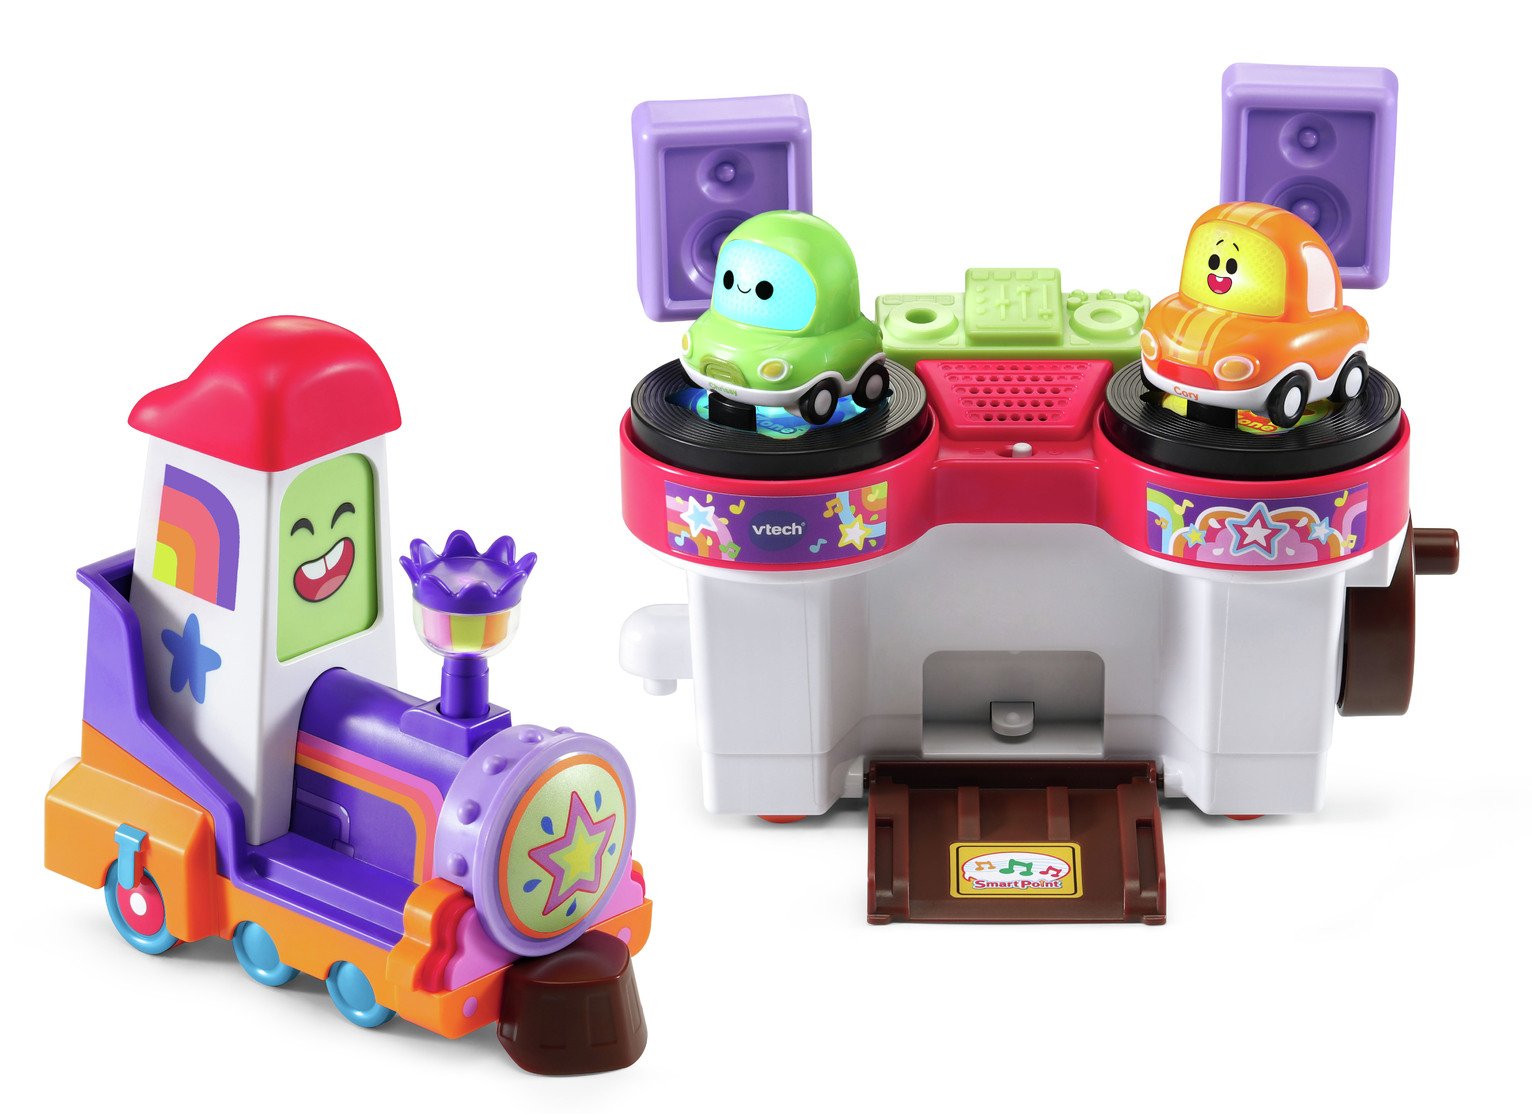 VTech Toot-Toot Cory Carson Review